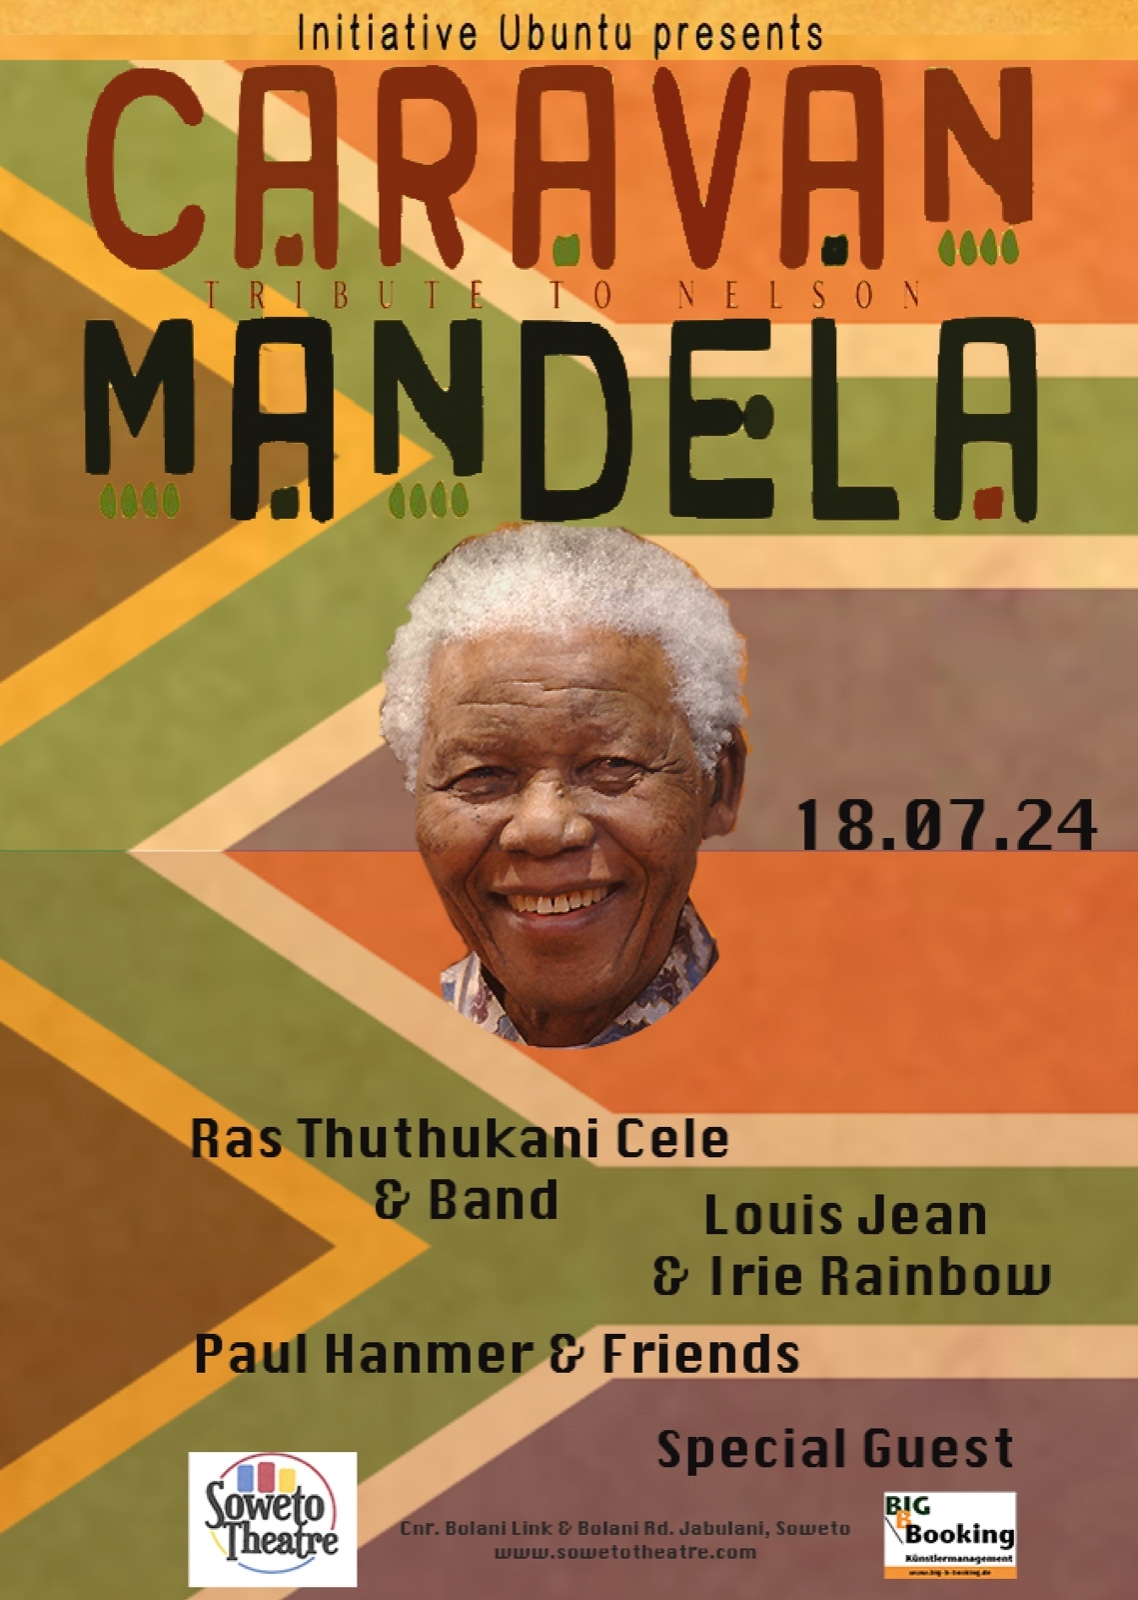 Paul Hanmer & Feya Faku special guests at tribute to Nelson Mandela at Soweto Theatre on 18 July